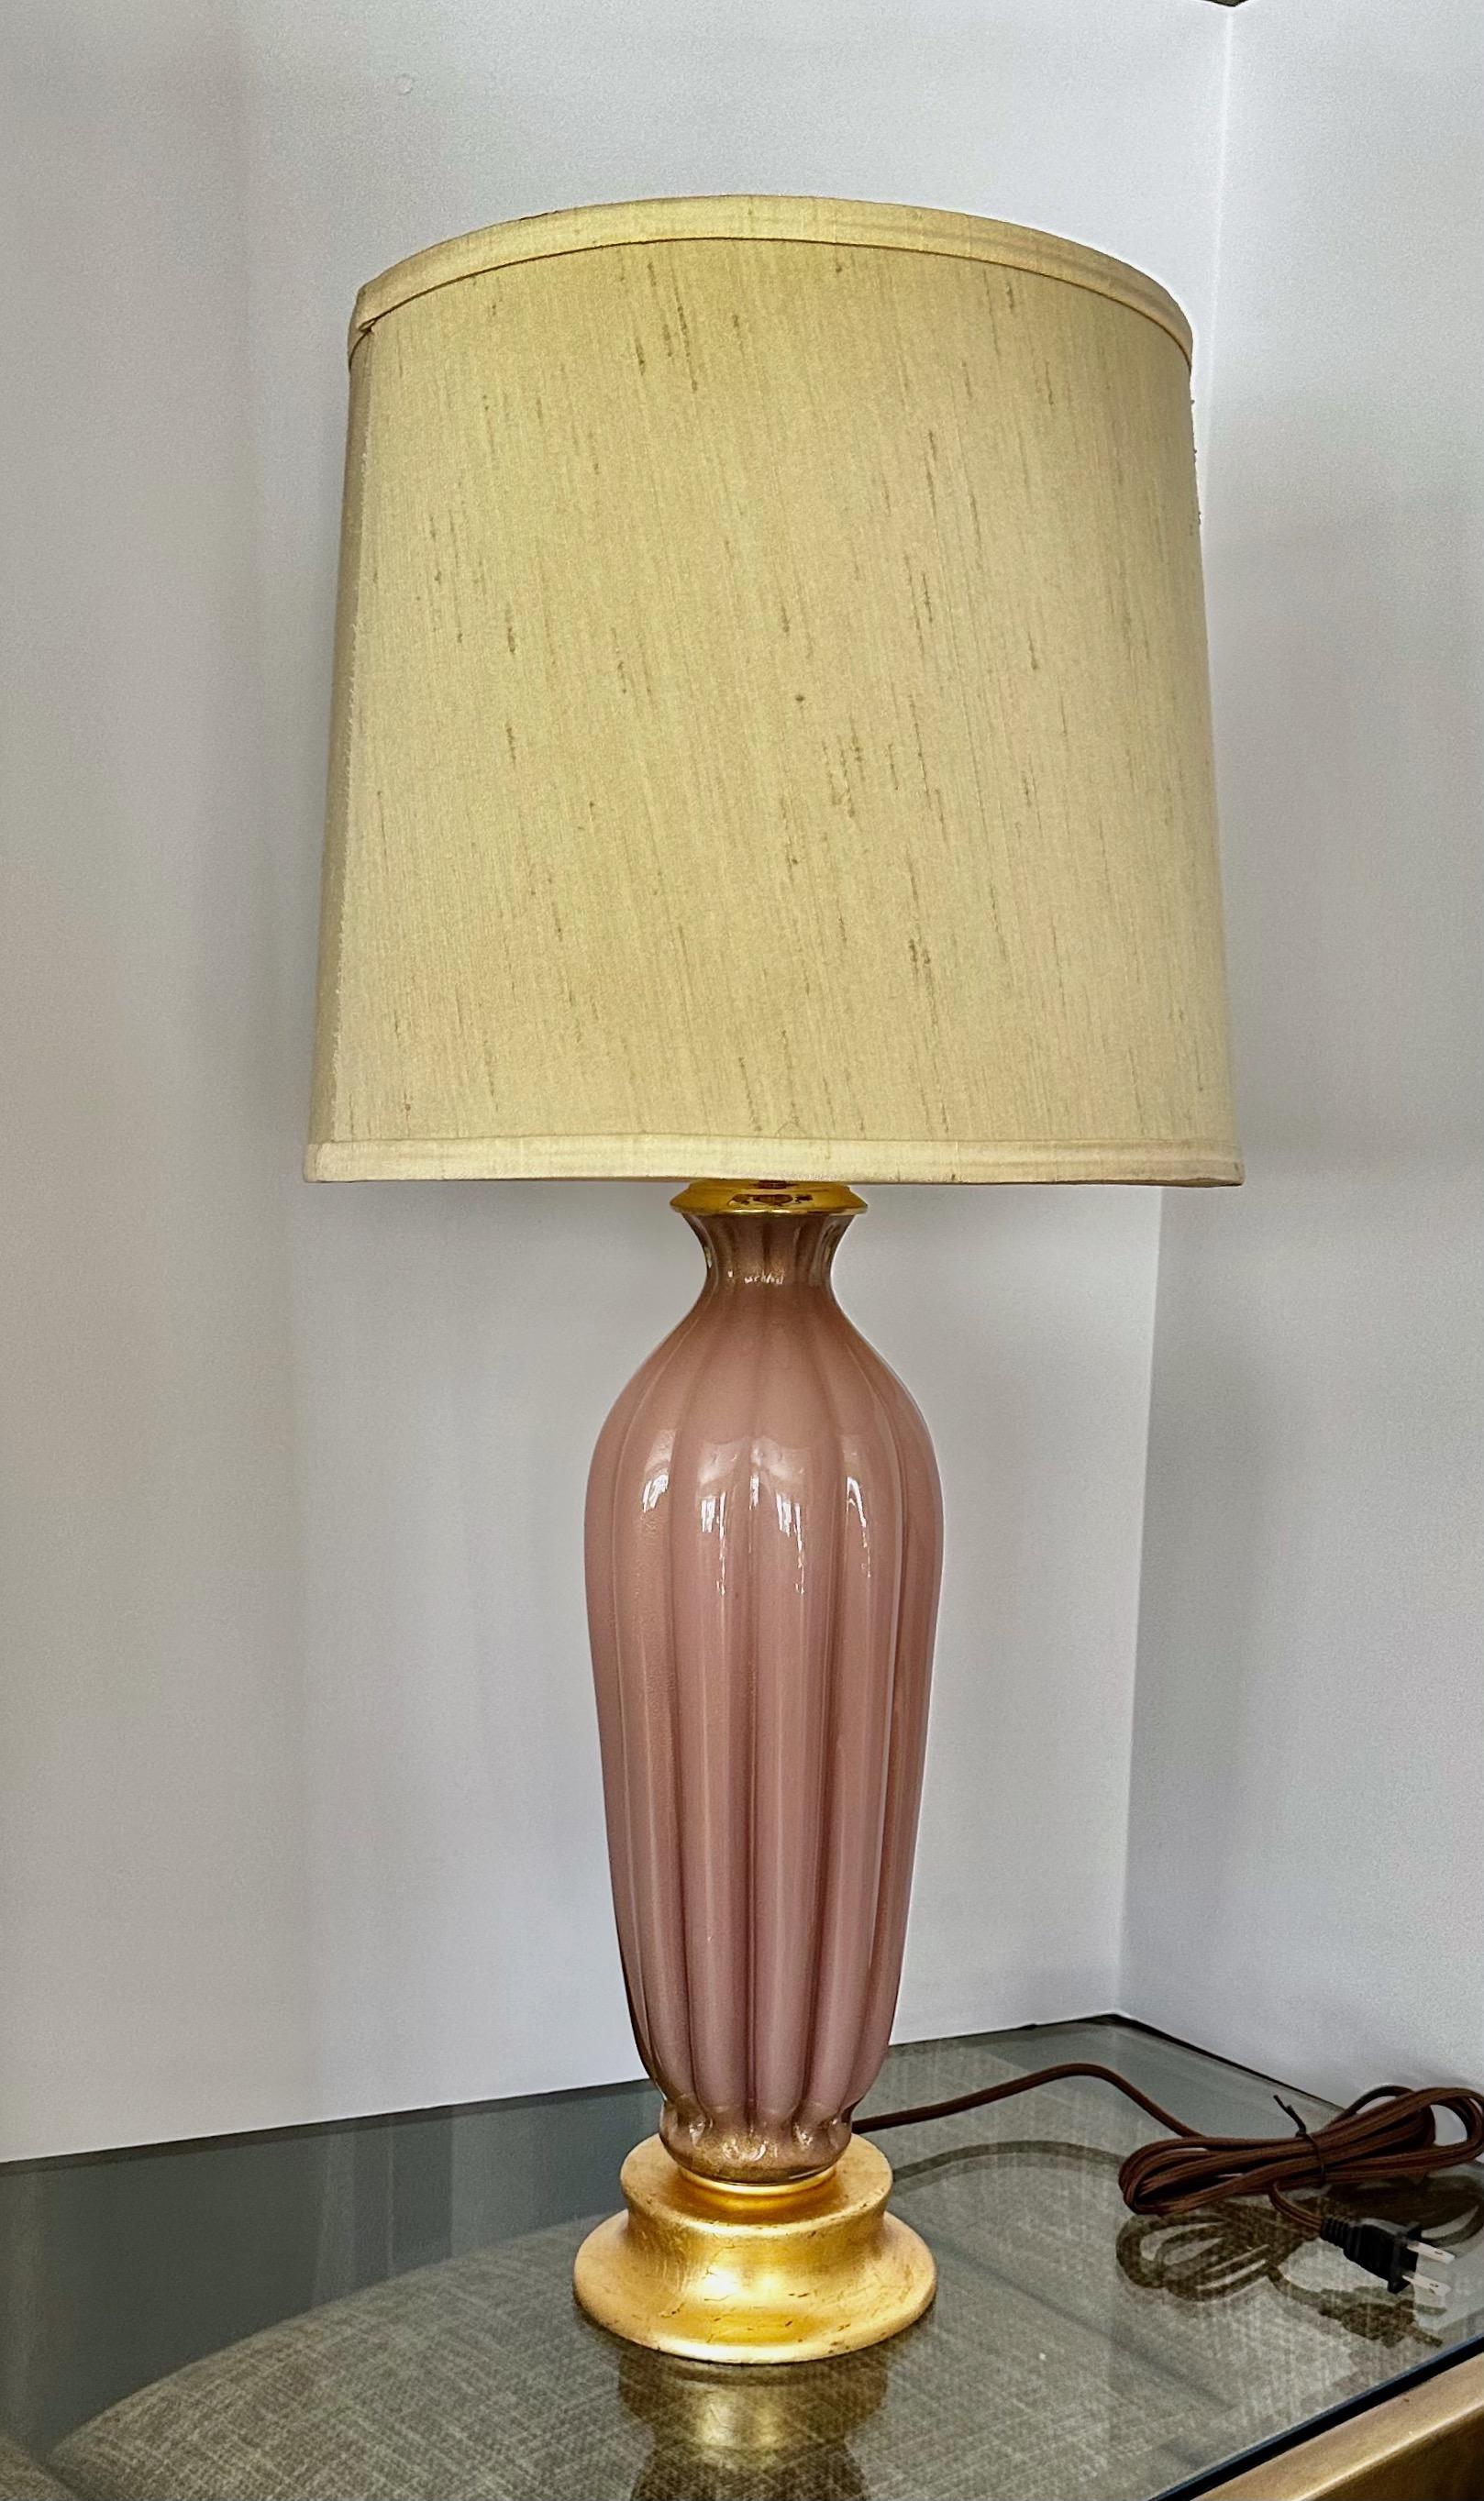 Murano ribbed pinkish/mauve colored glass table lamp with gold inclusions. Glass body rest on custom giltwood base. Newly wired for US with new brass fittings including 3 way socket and rayon covered cord.

Measures: 21